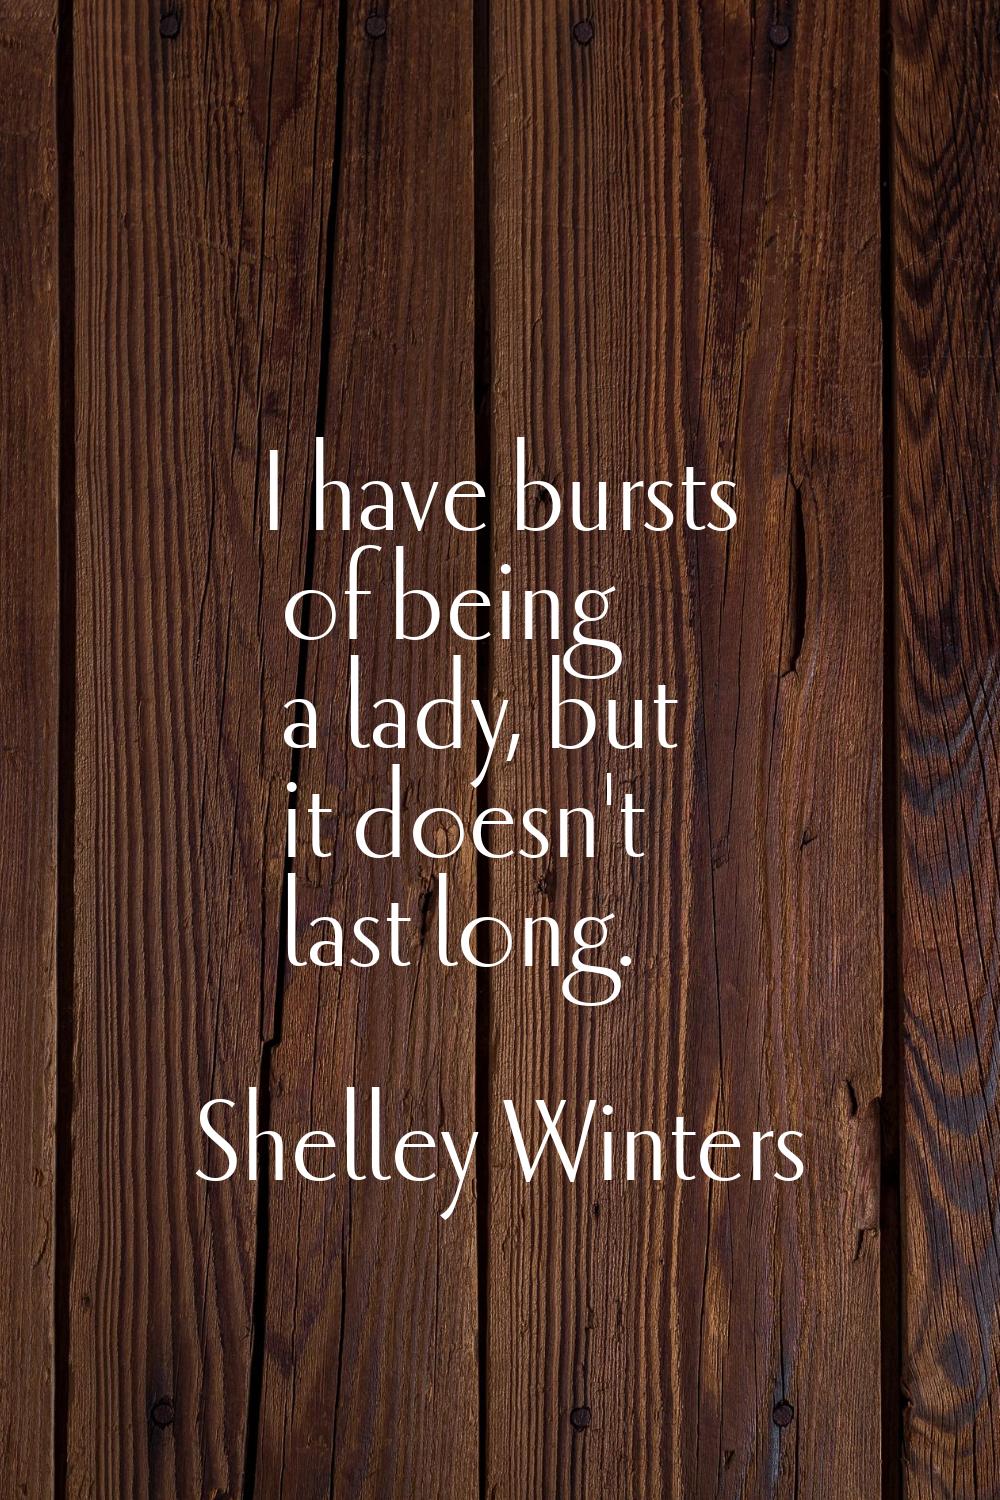 I have bursts of being a lady, but it doesn't last long.